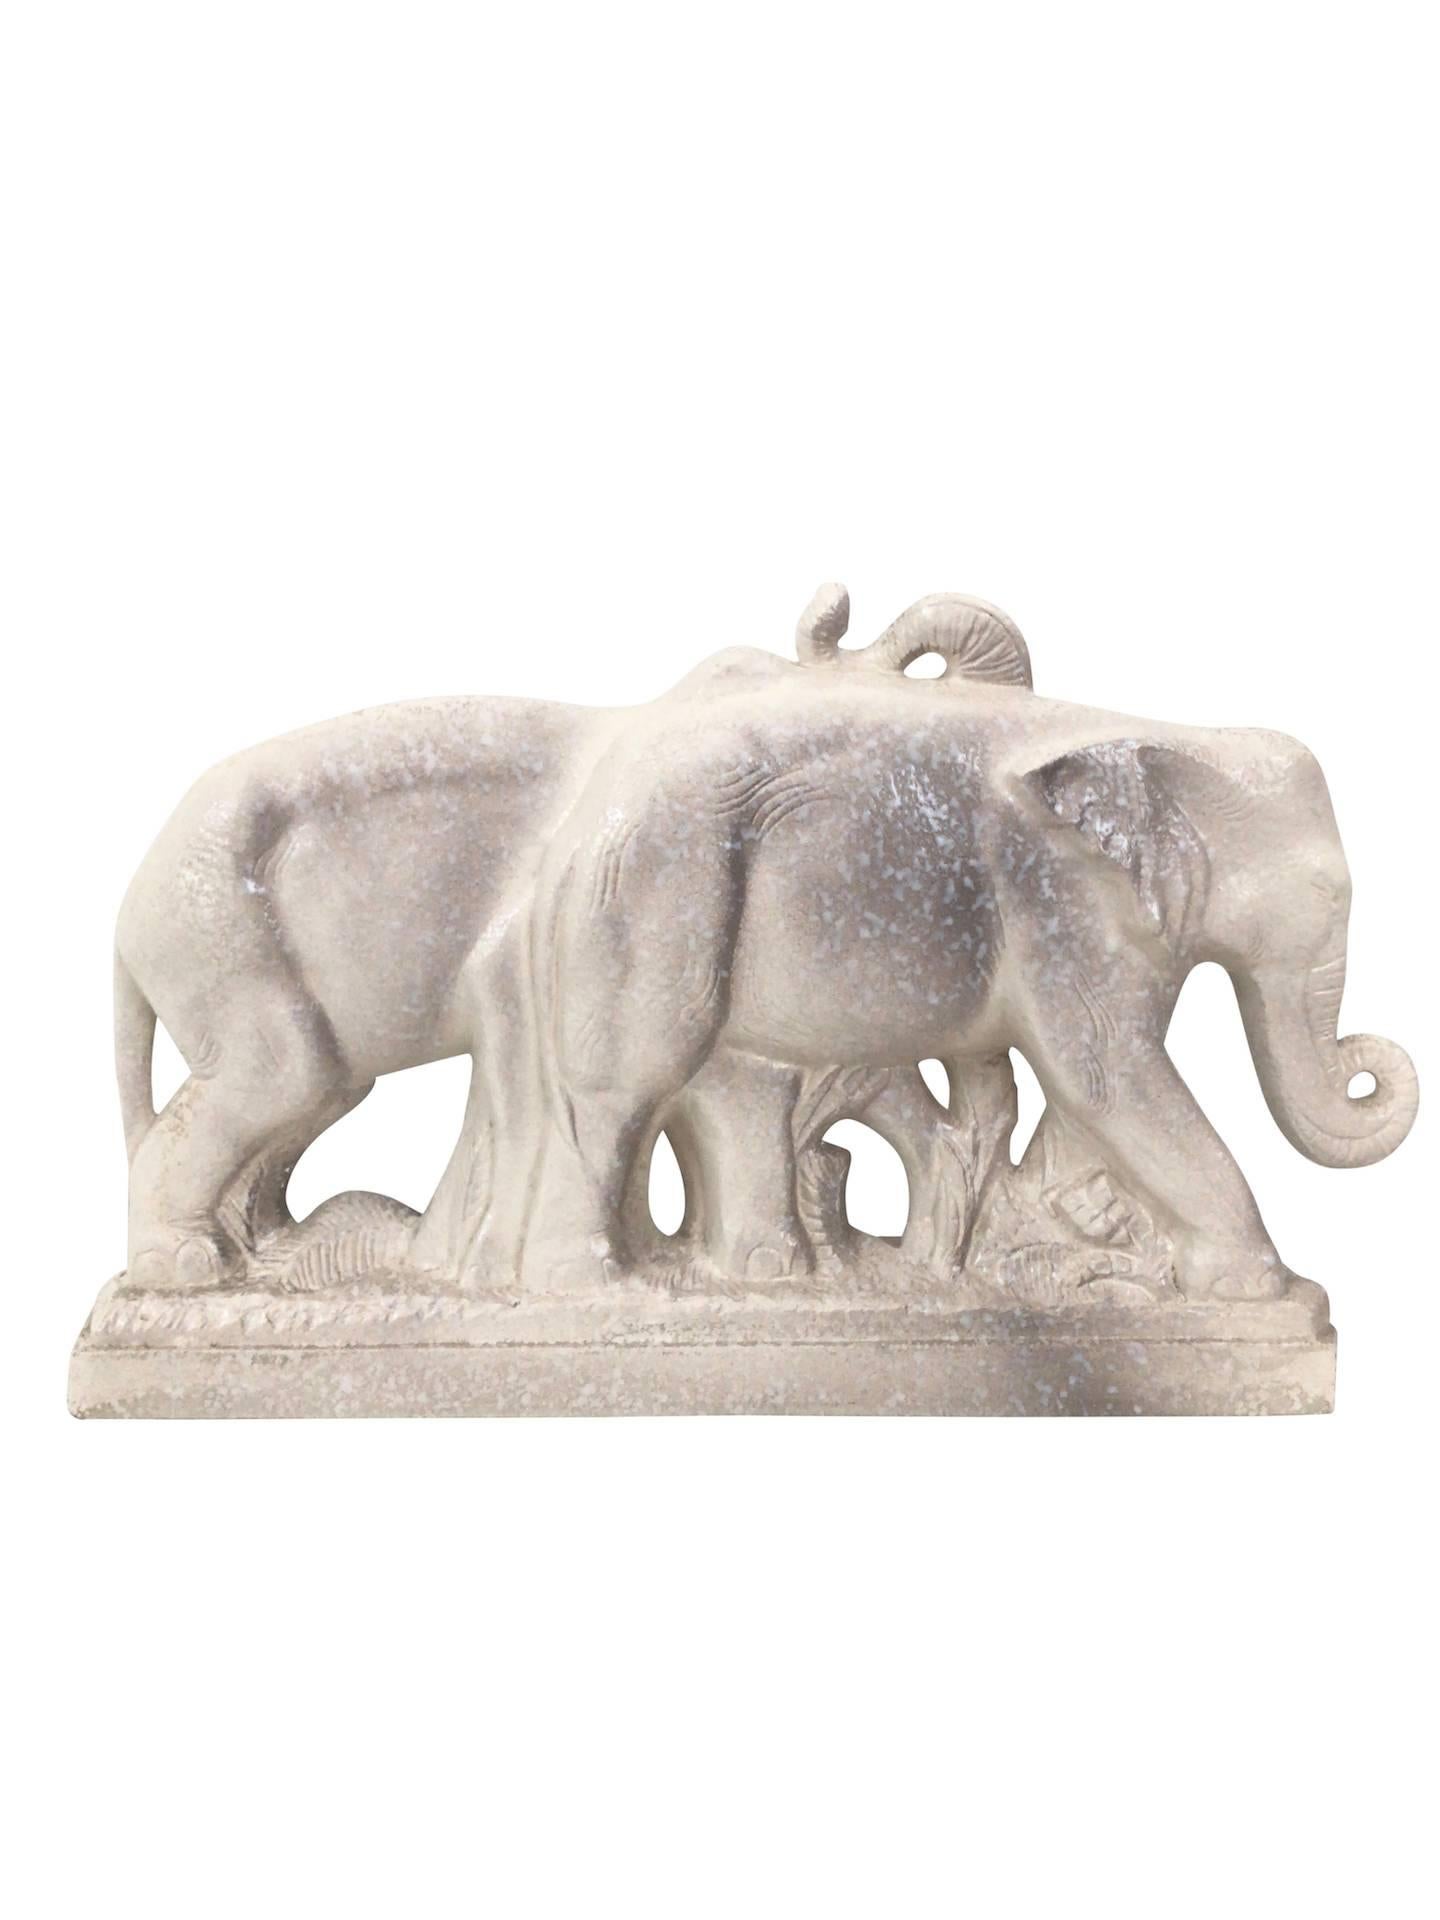 French Louis Fontinelle, Cream Glazed Ceramic Elephants, France, 1930s For Sale